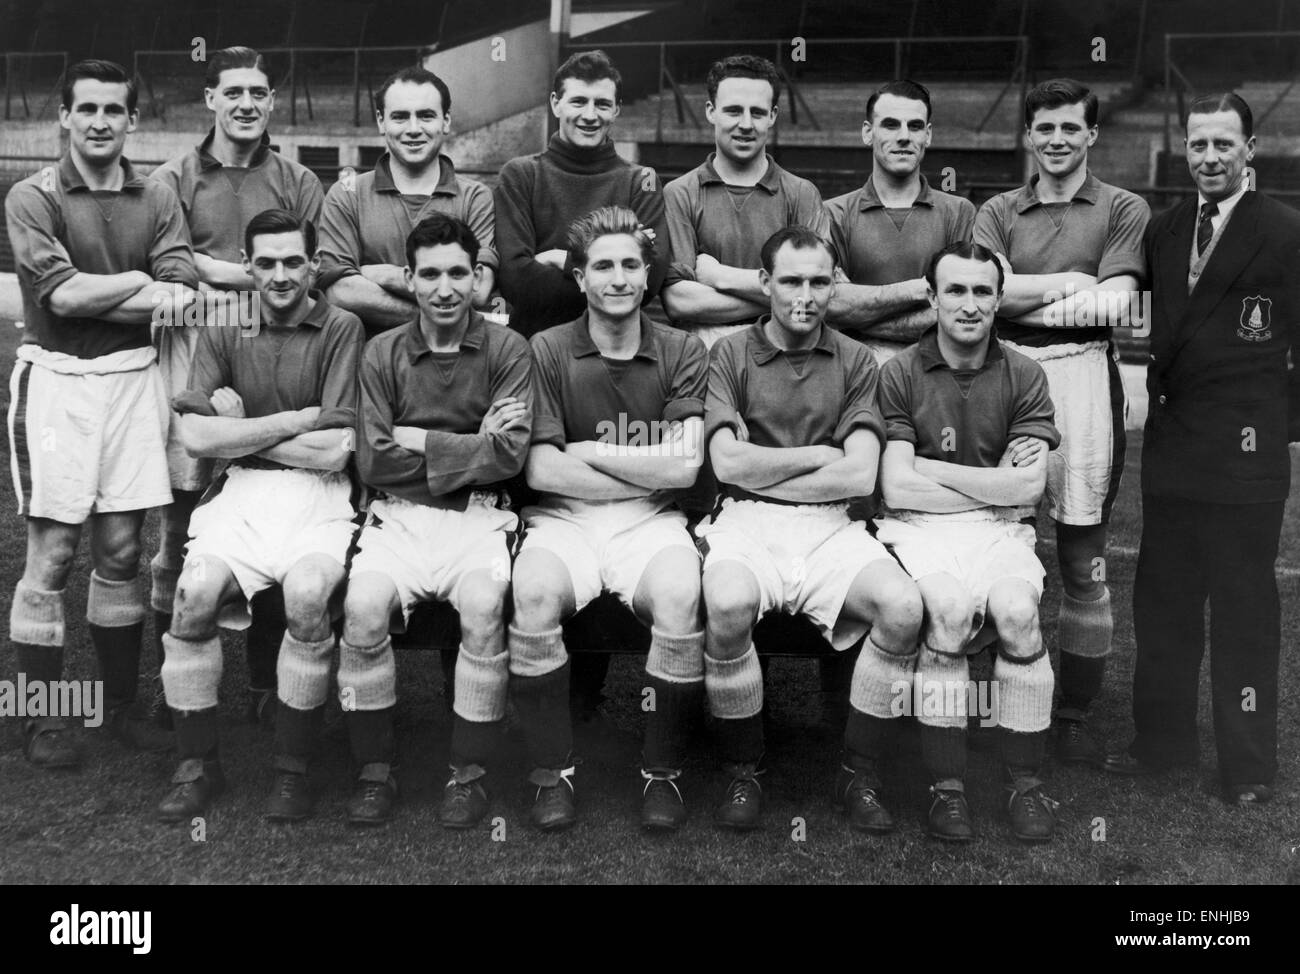 Everton team pose for a group photograph, 28th January 1955. Back row left to right: George Rankin, John Parker, Peter Farrell, Jimmy O' Neill, Tommy Jones, Cyril Lello, Eric Moore and First team trainer Charlie Leyfield. Front row: Eddie Wainwright, Wall Stock Photo